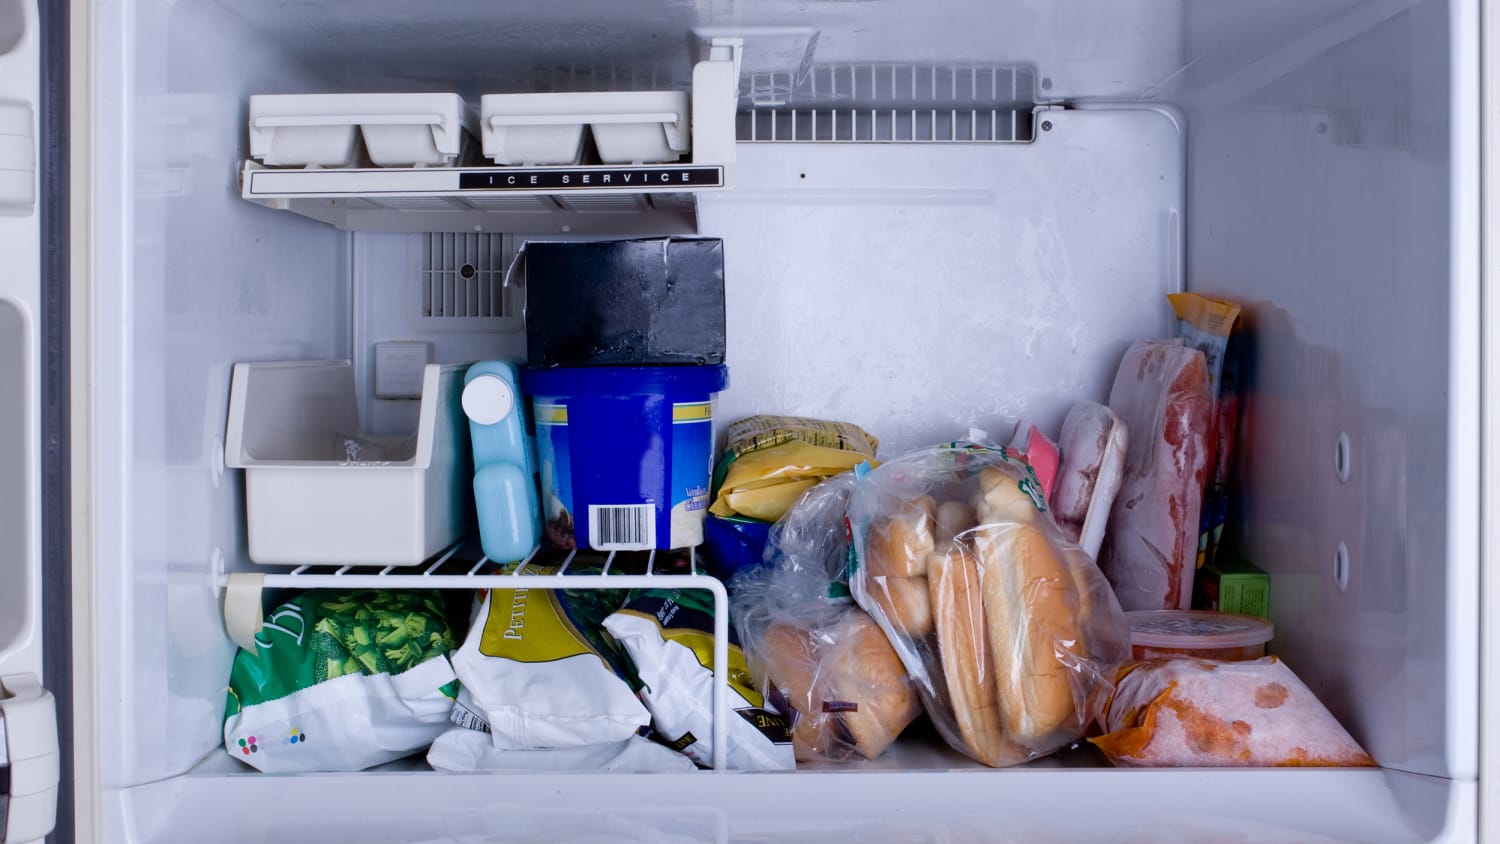 How to clean your refrigerator properly